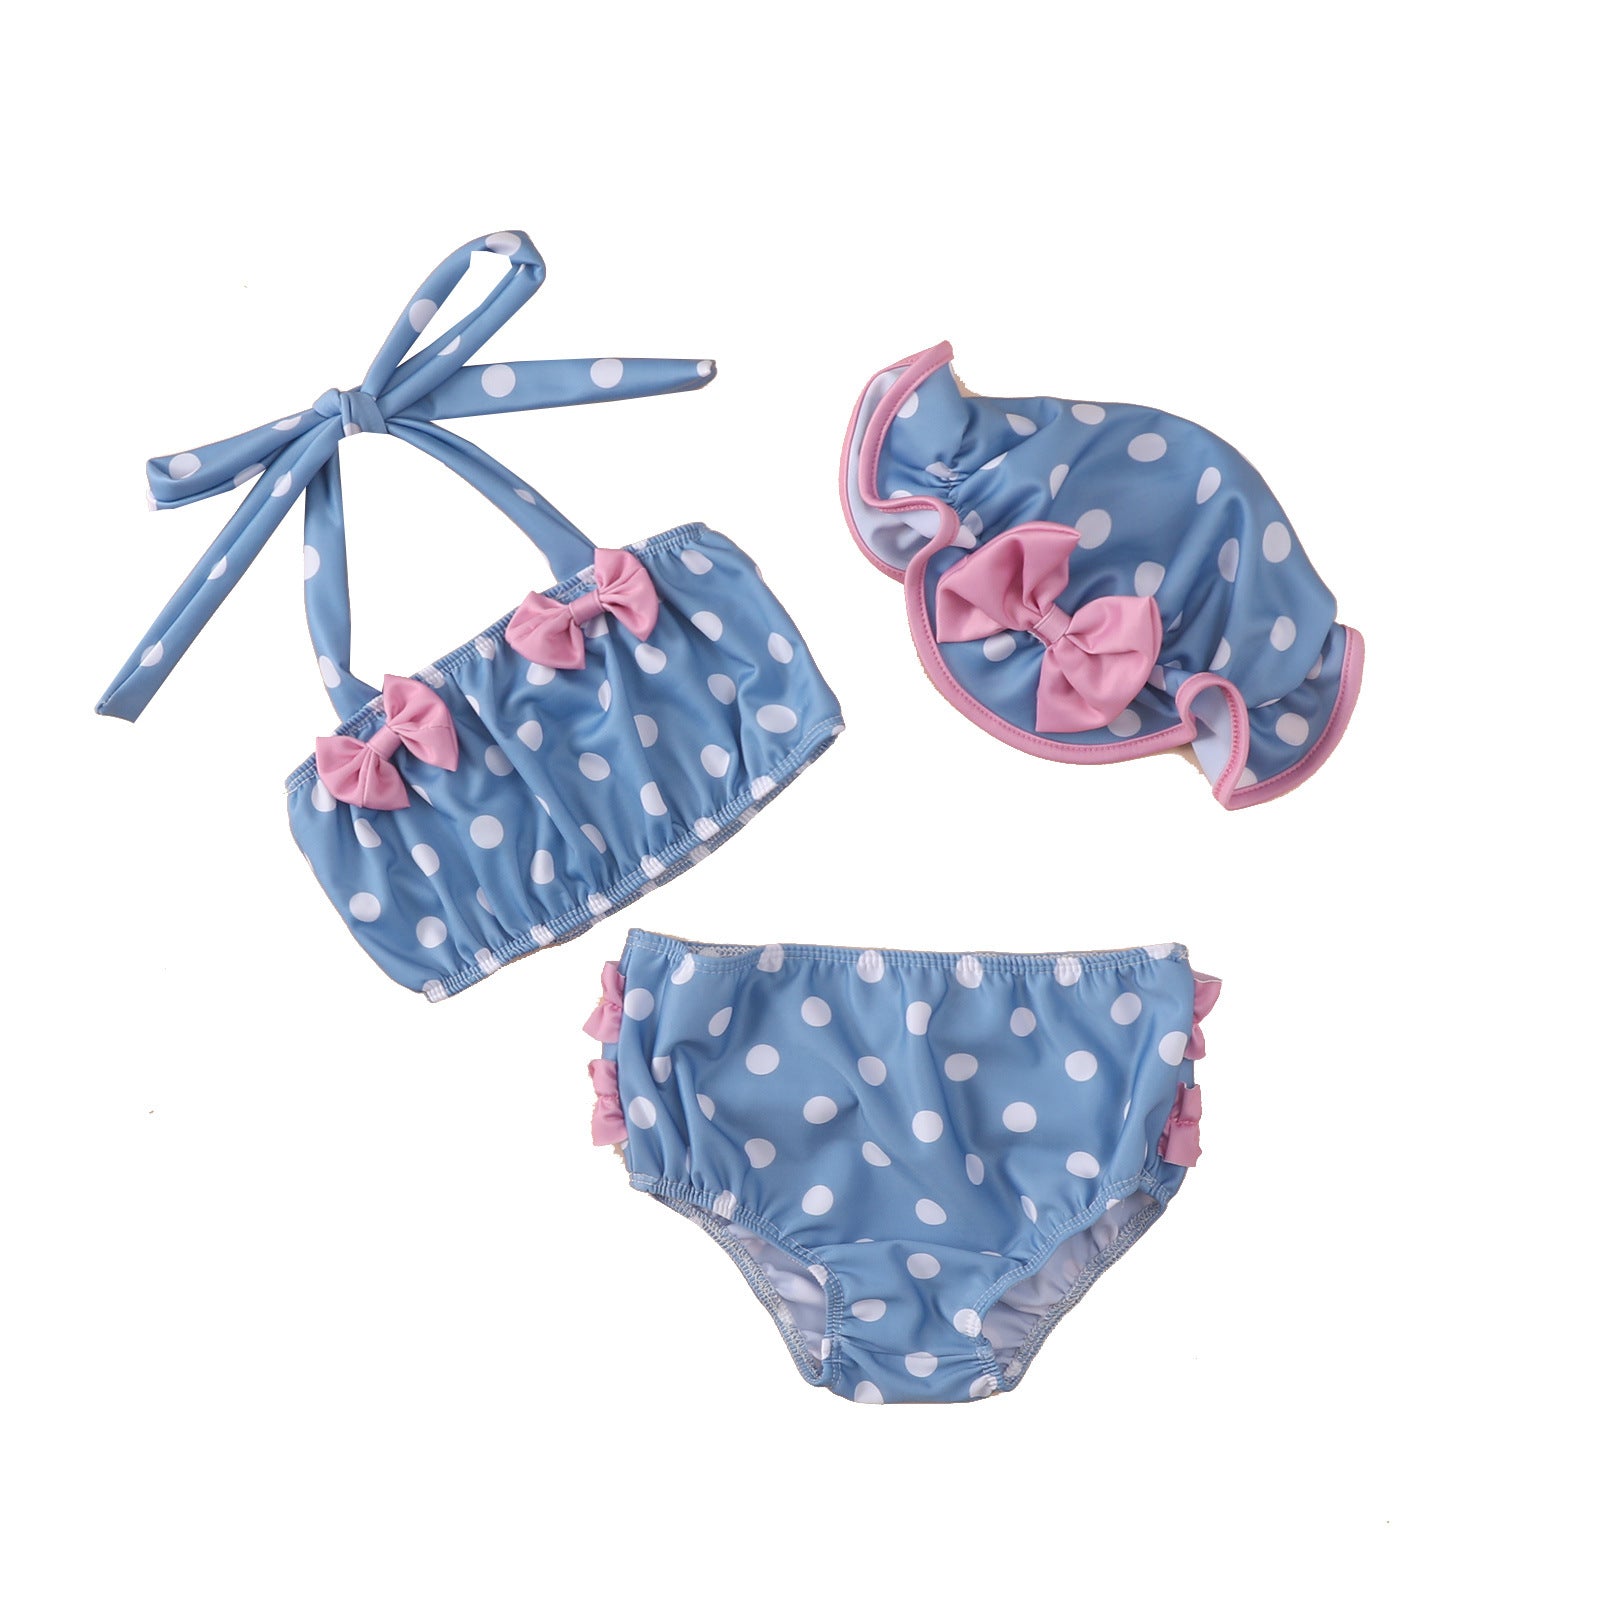 Summer Infant and Young Girls Brassiere Hanging Neck Tie Polka Dot Striped Bow Split Swimsuit Three Sets